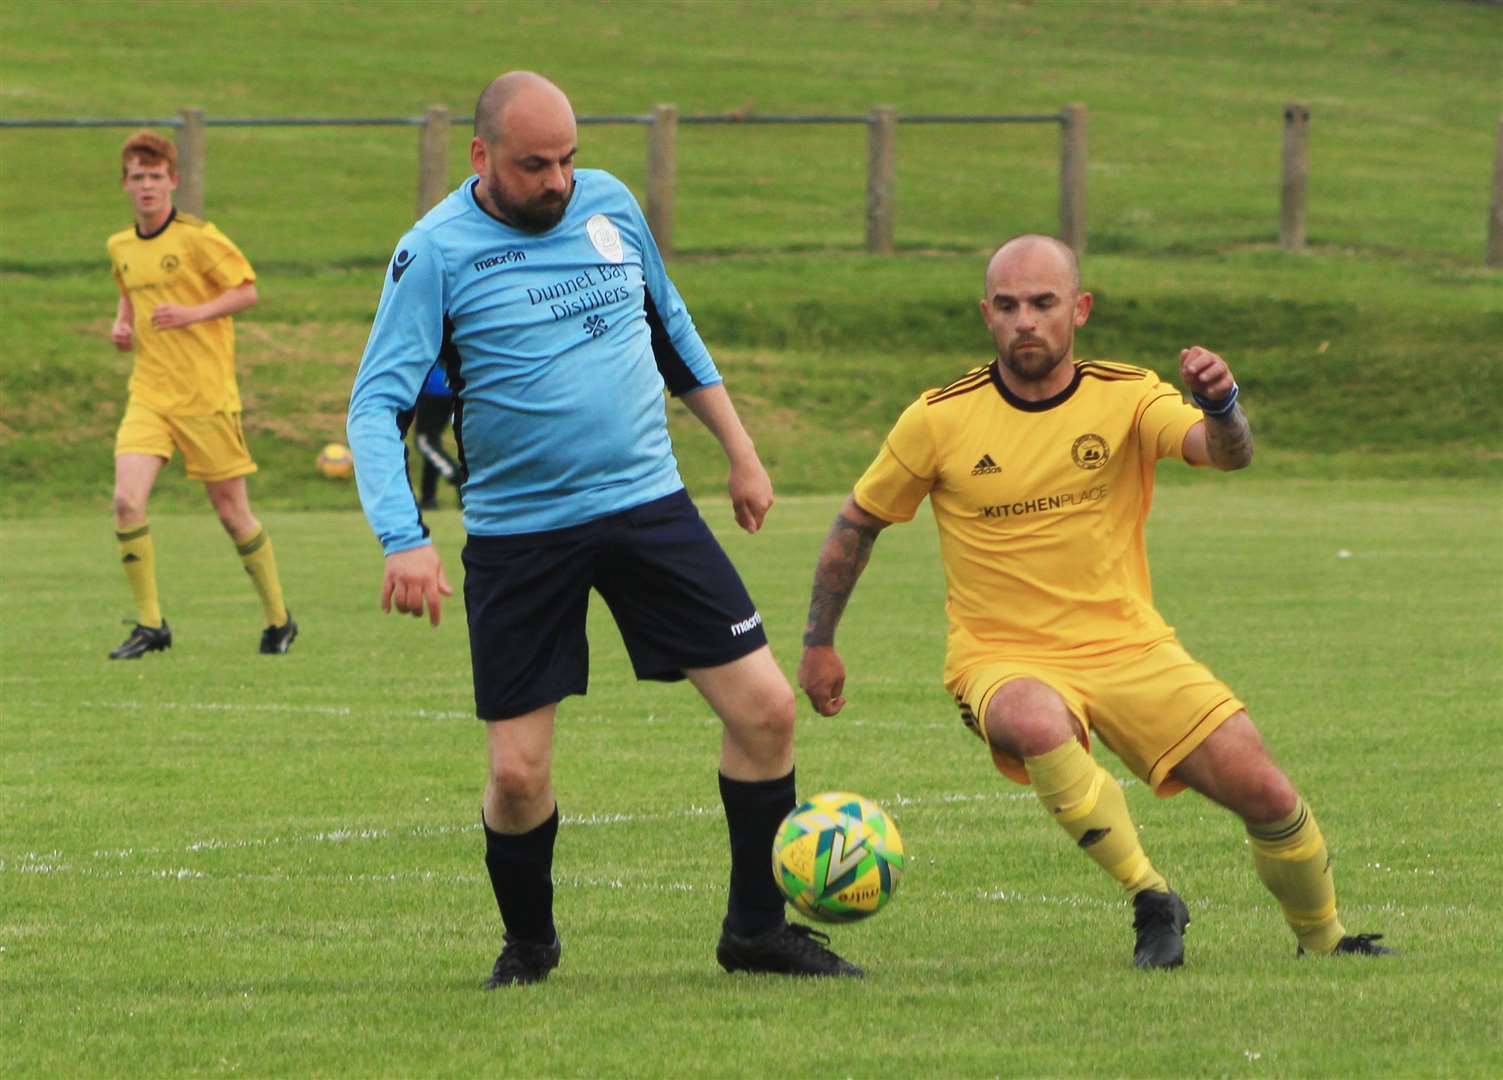 Staxigoe United's Martin Banks wins the ball in their 17-0 victory over Top Joe's this week.